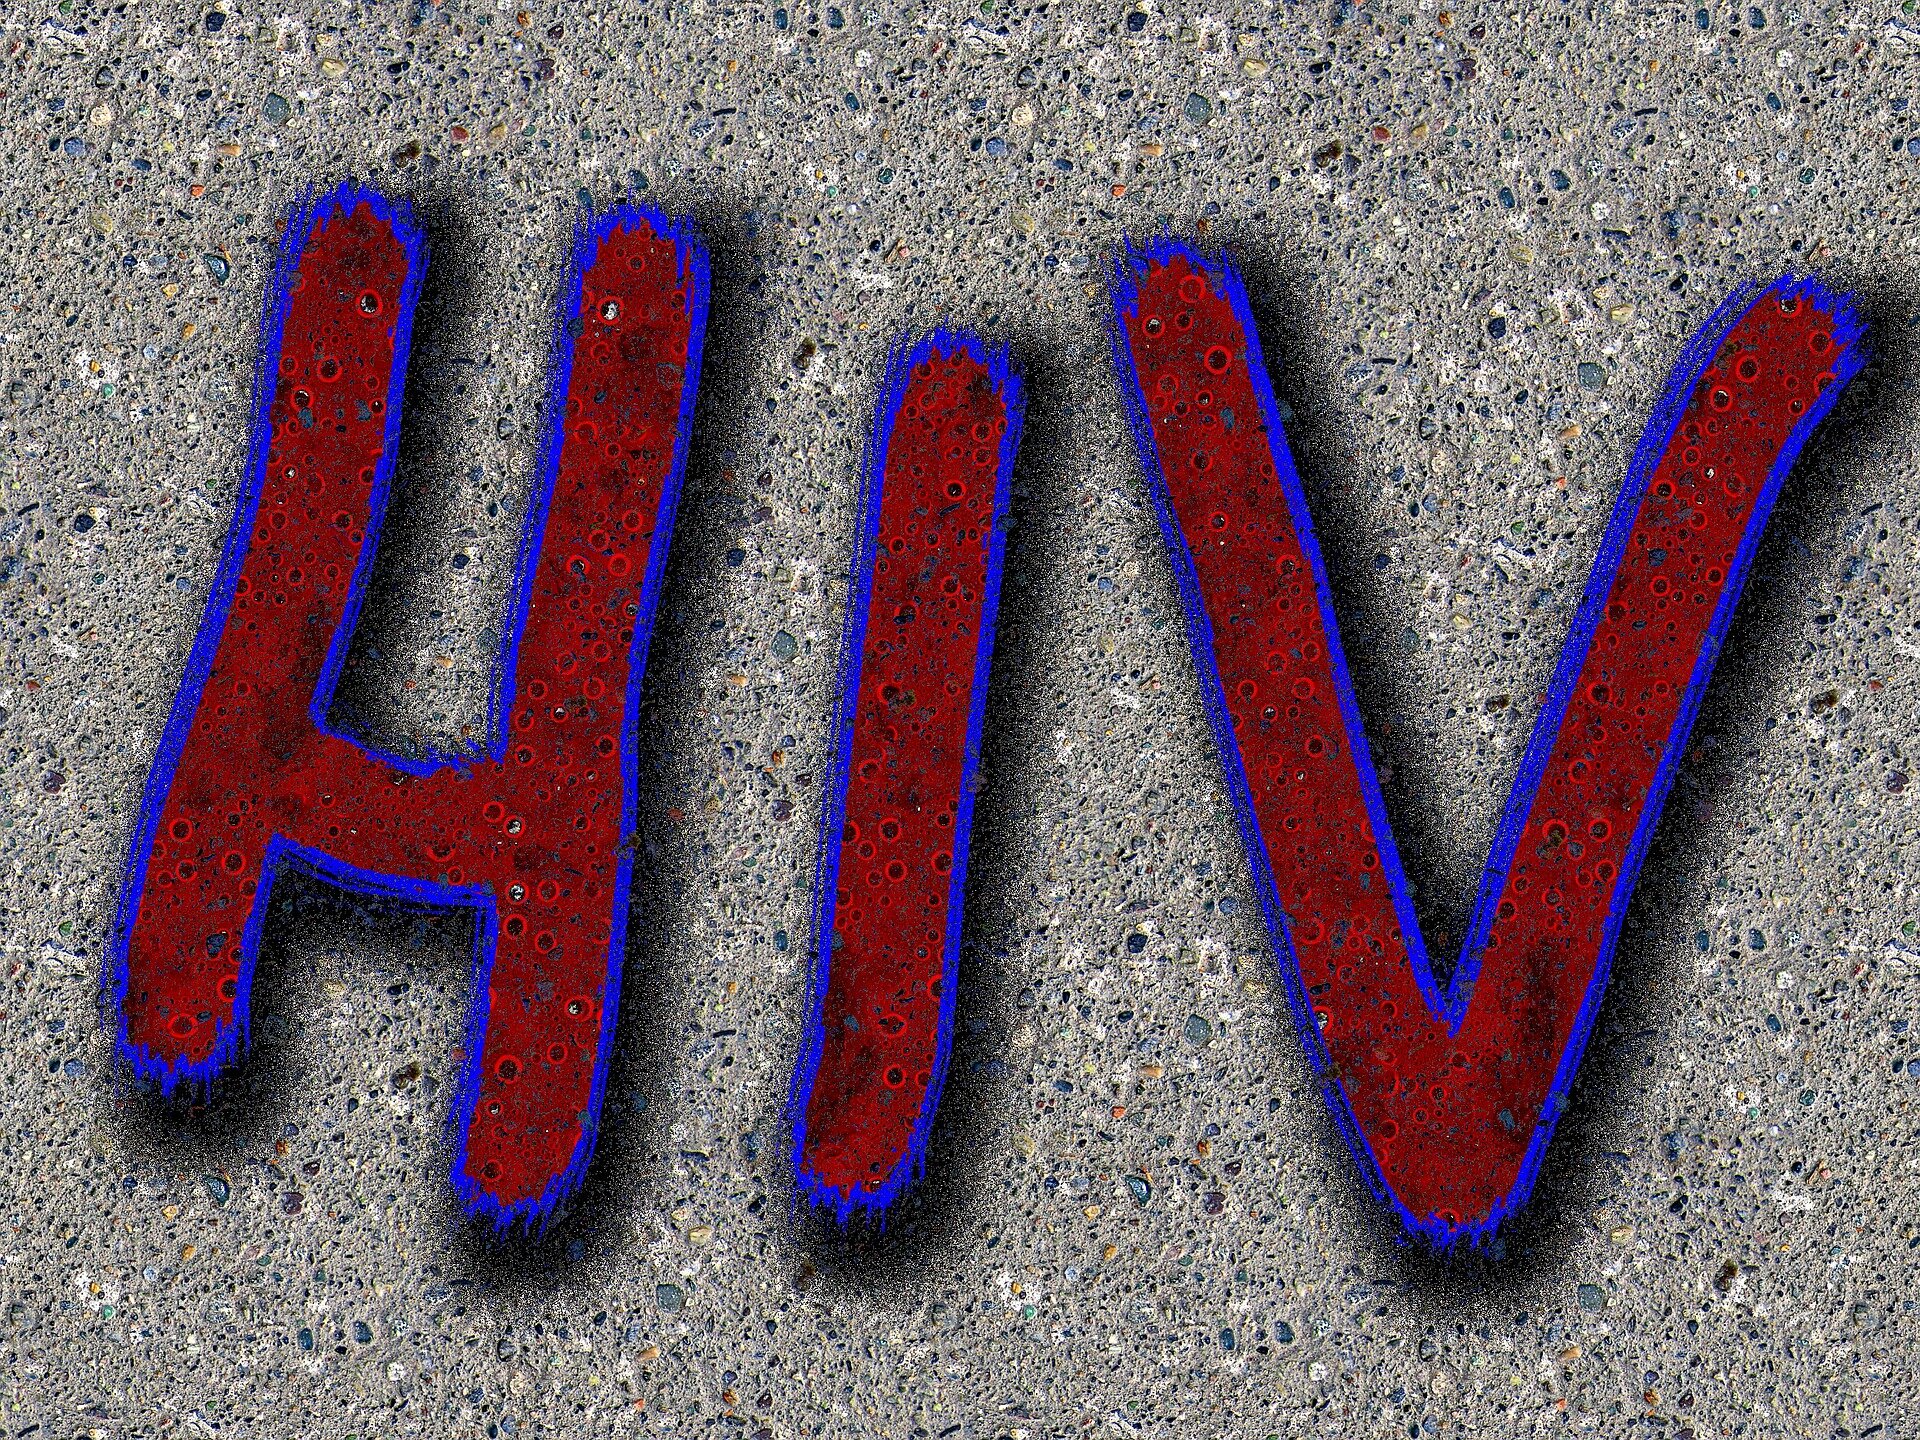 Americans with HIV are living longer: Federal spending isn't keeping up